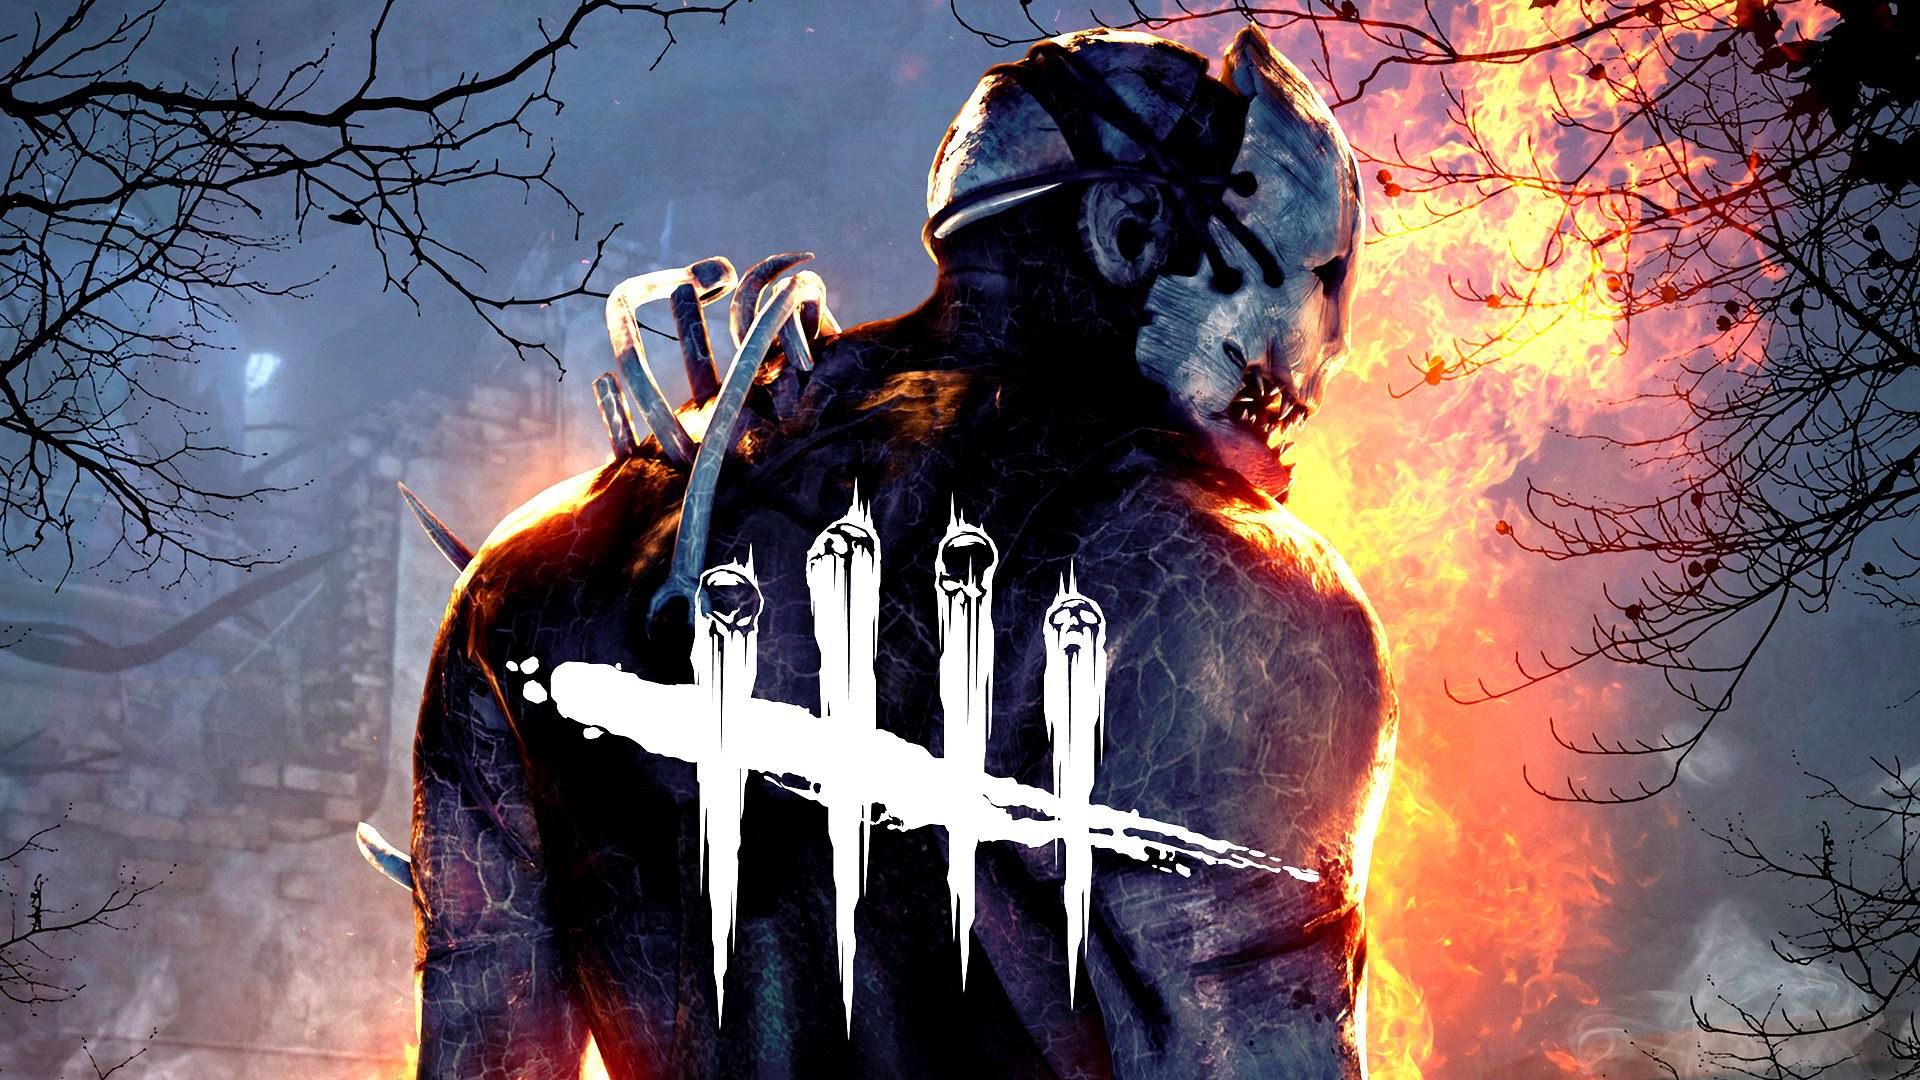 Dead by Daylight Wallpaper Image Photo Picture Background